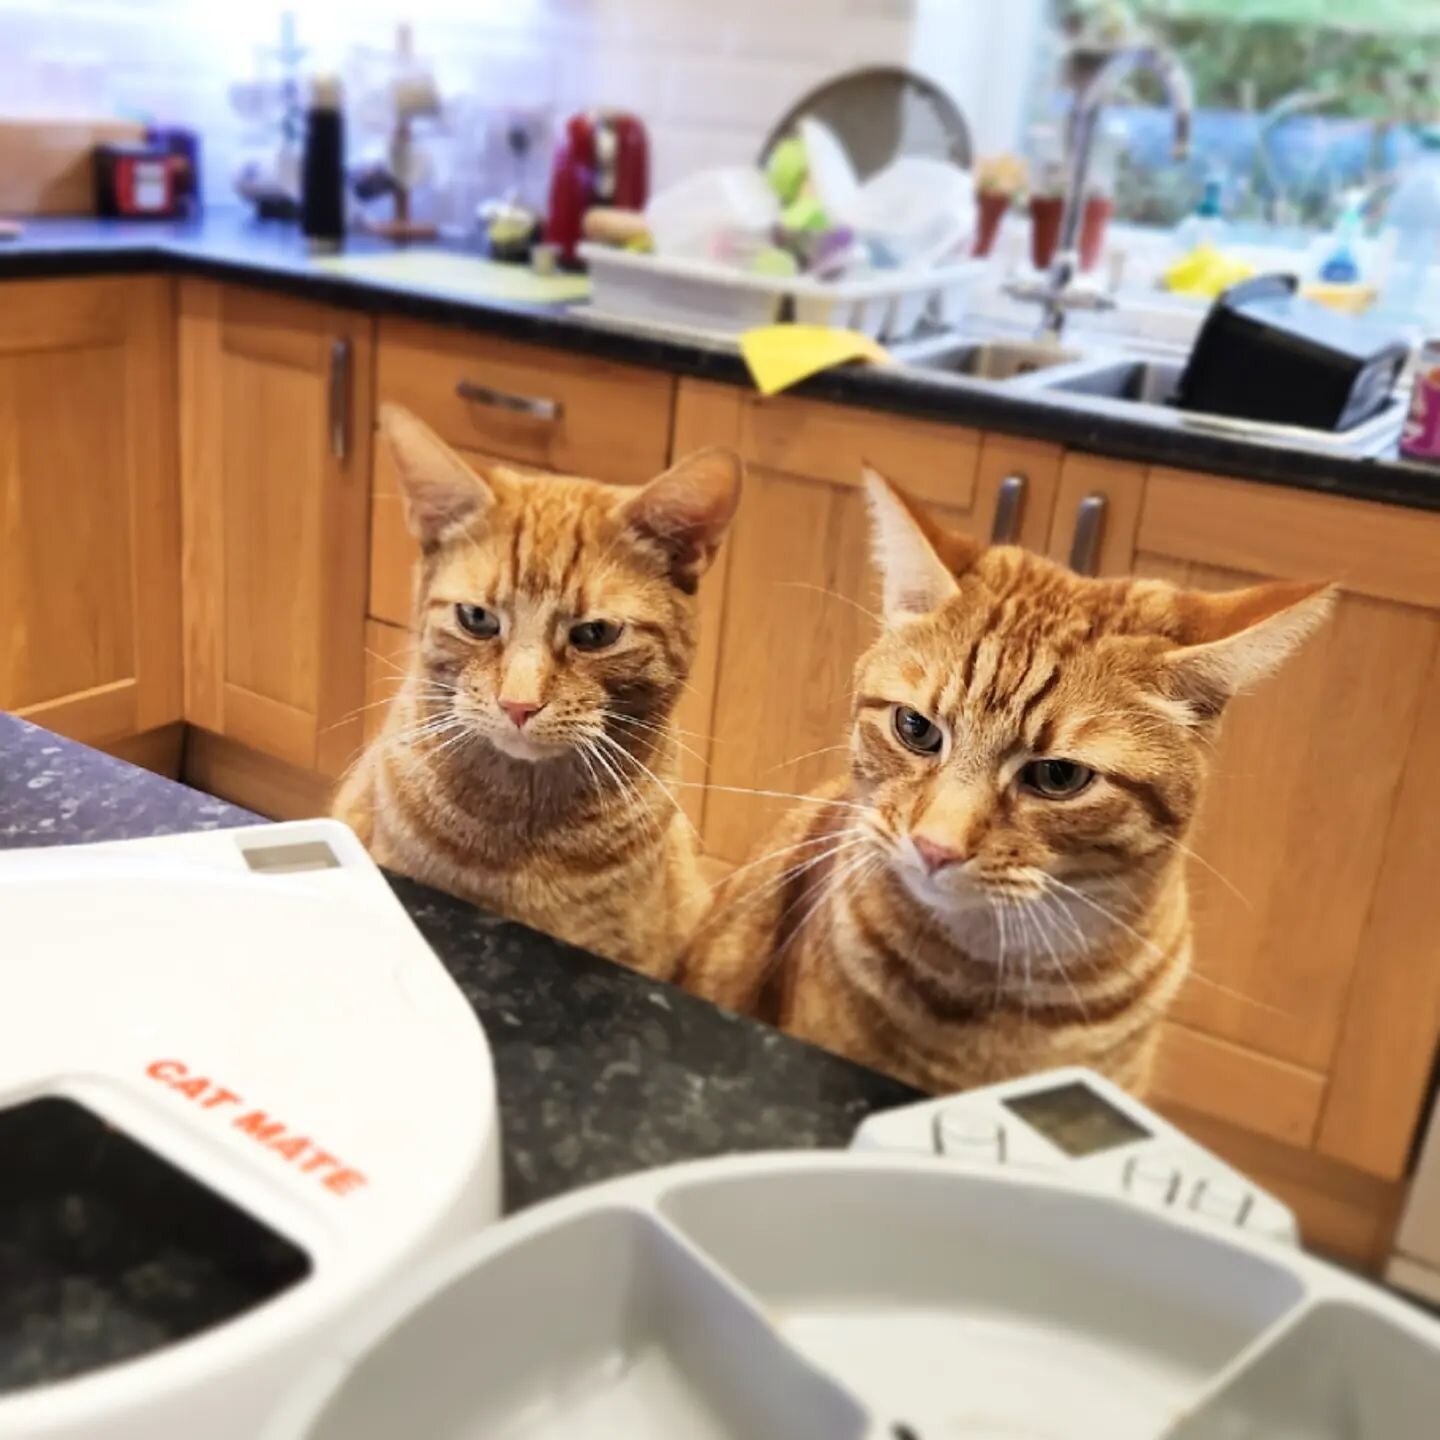 Fred and George like to ensure that the auto-feeder filling process is carried out to their very high standards.

#catsittingmanchester
&middot;
&middot;
&middot;
#cat_of_instagram #catsofinstagram #meow #catlover #catstagram #catsagram #instacat #ki